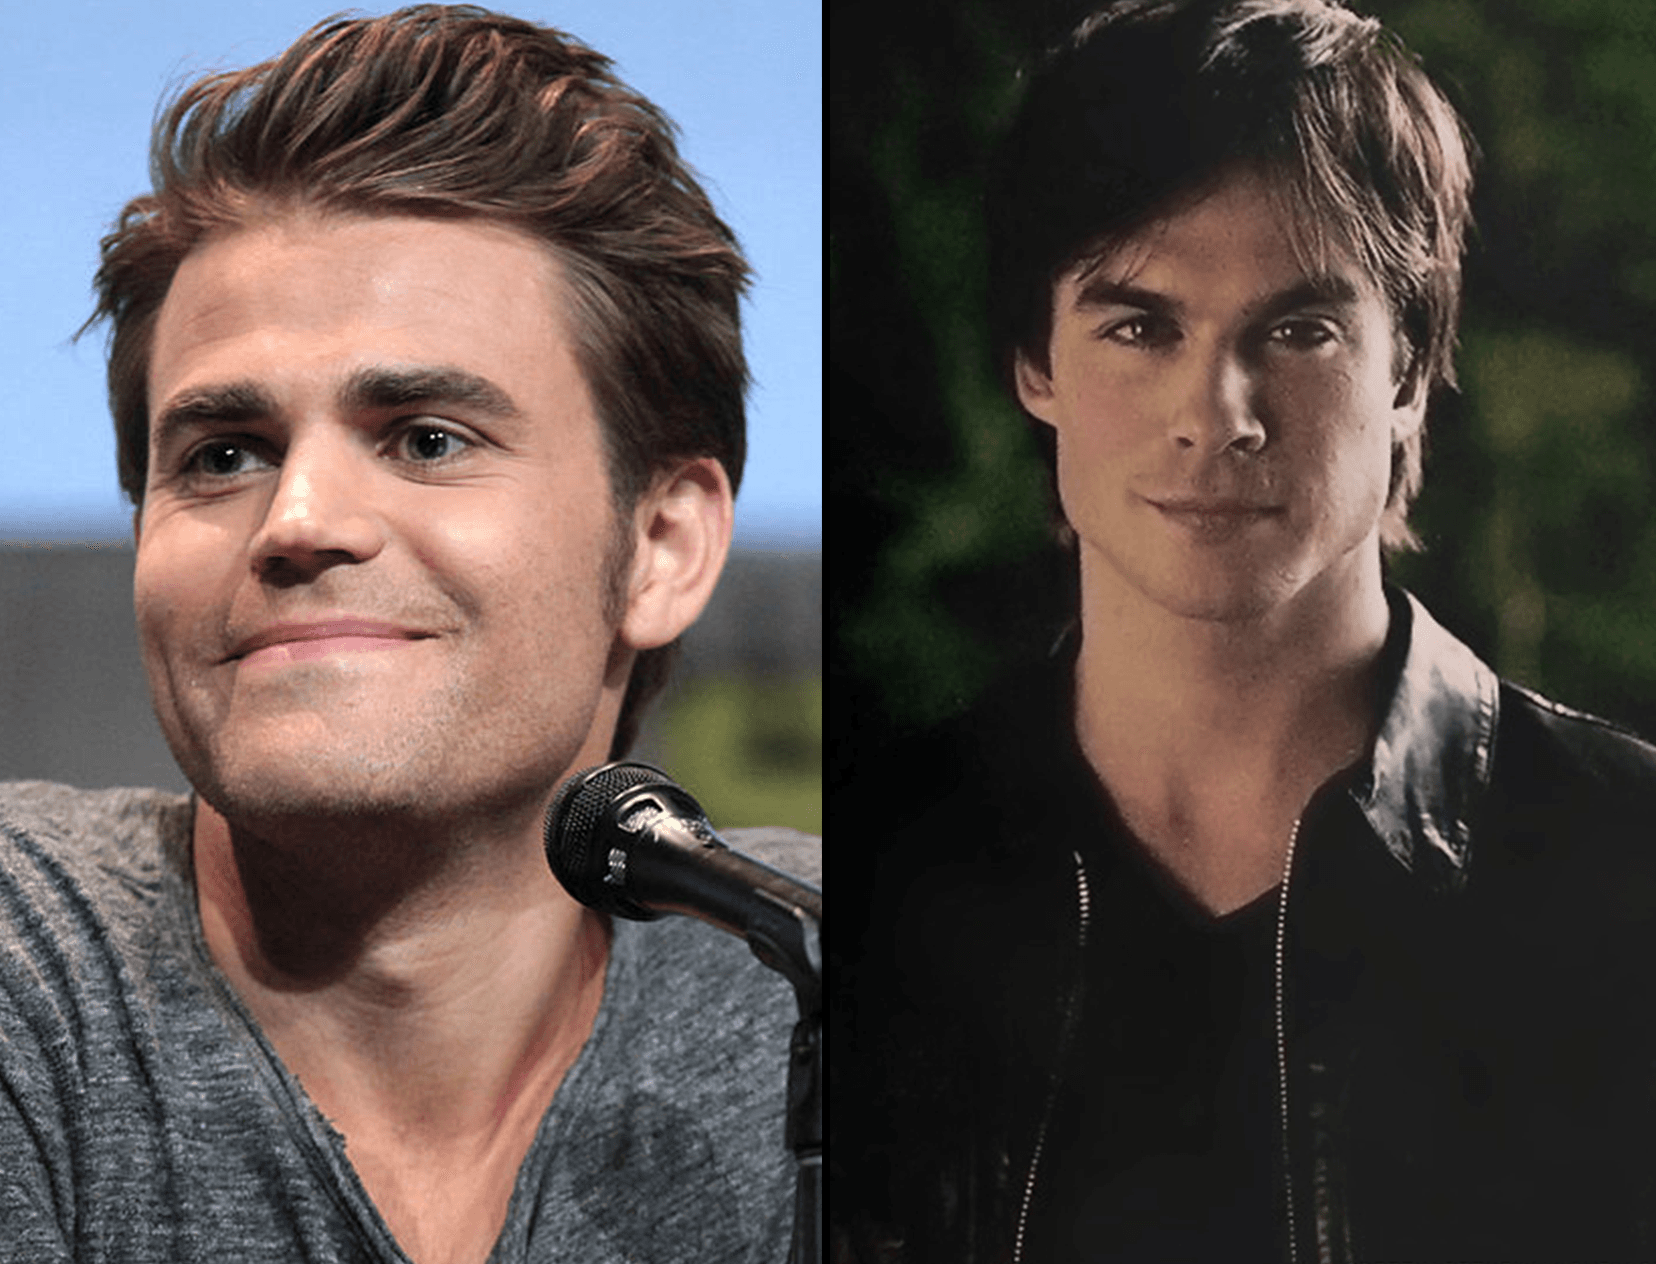 TIL Paul Wesley Is Damon Salvatore In Real Life &amp; We Don’t Know How To Move On From This